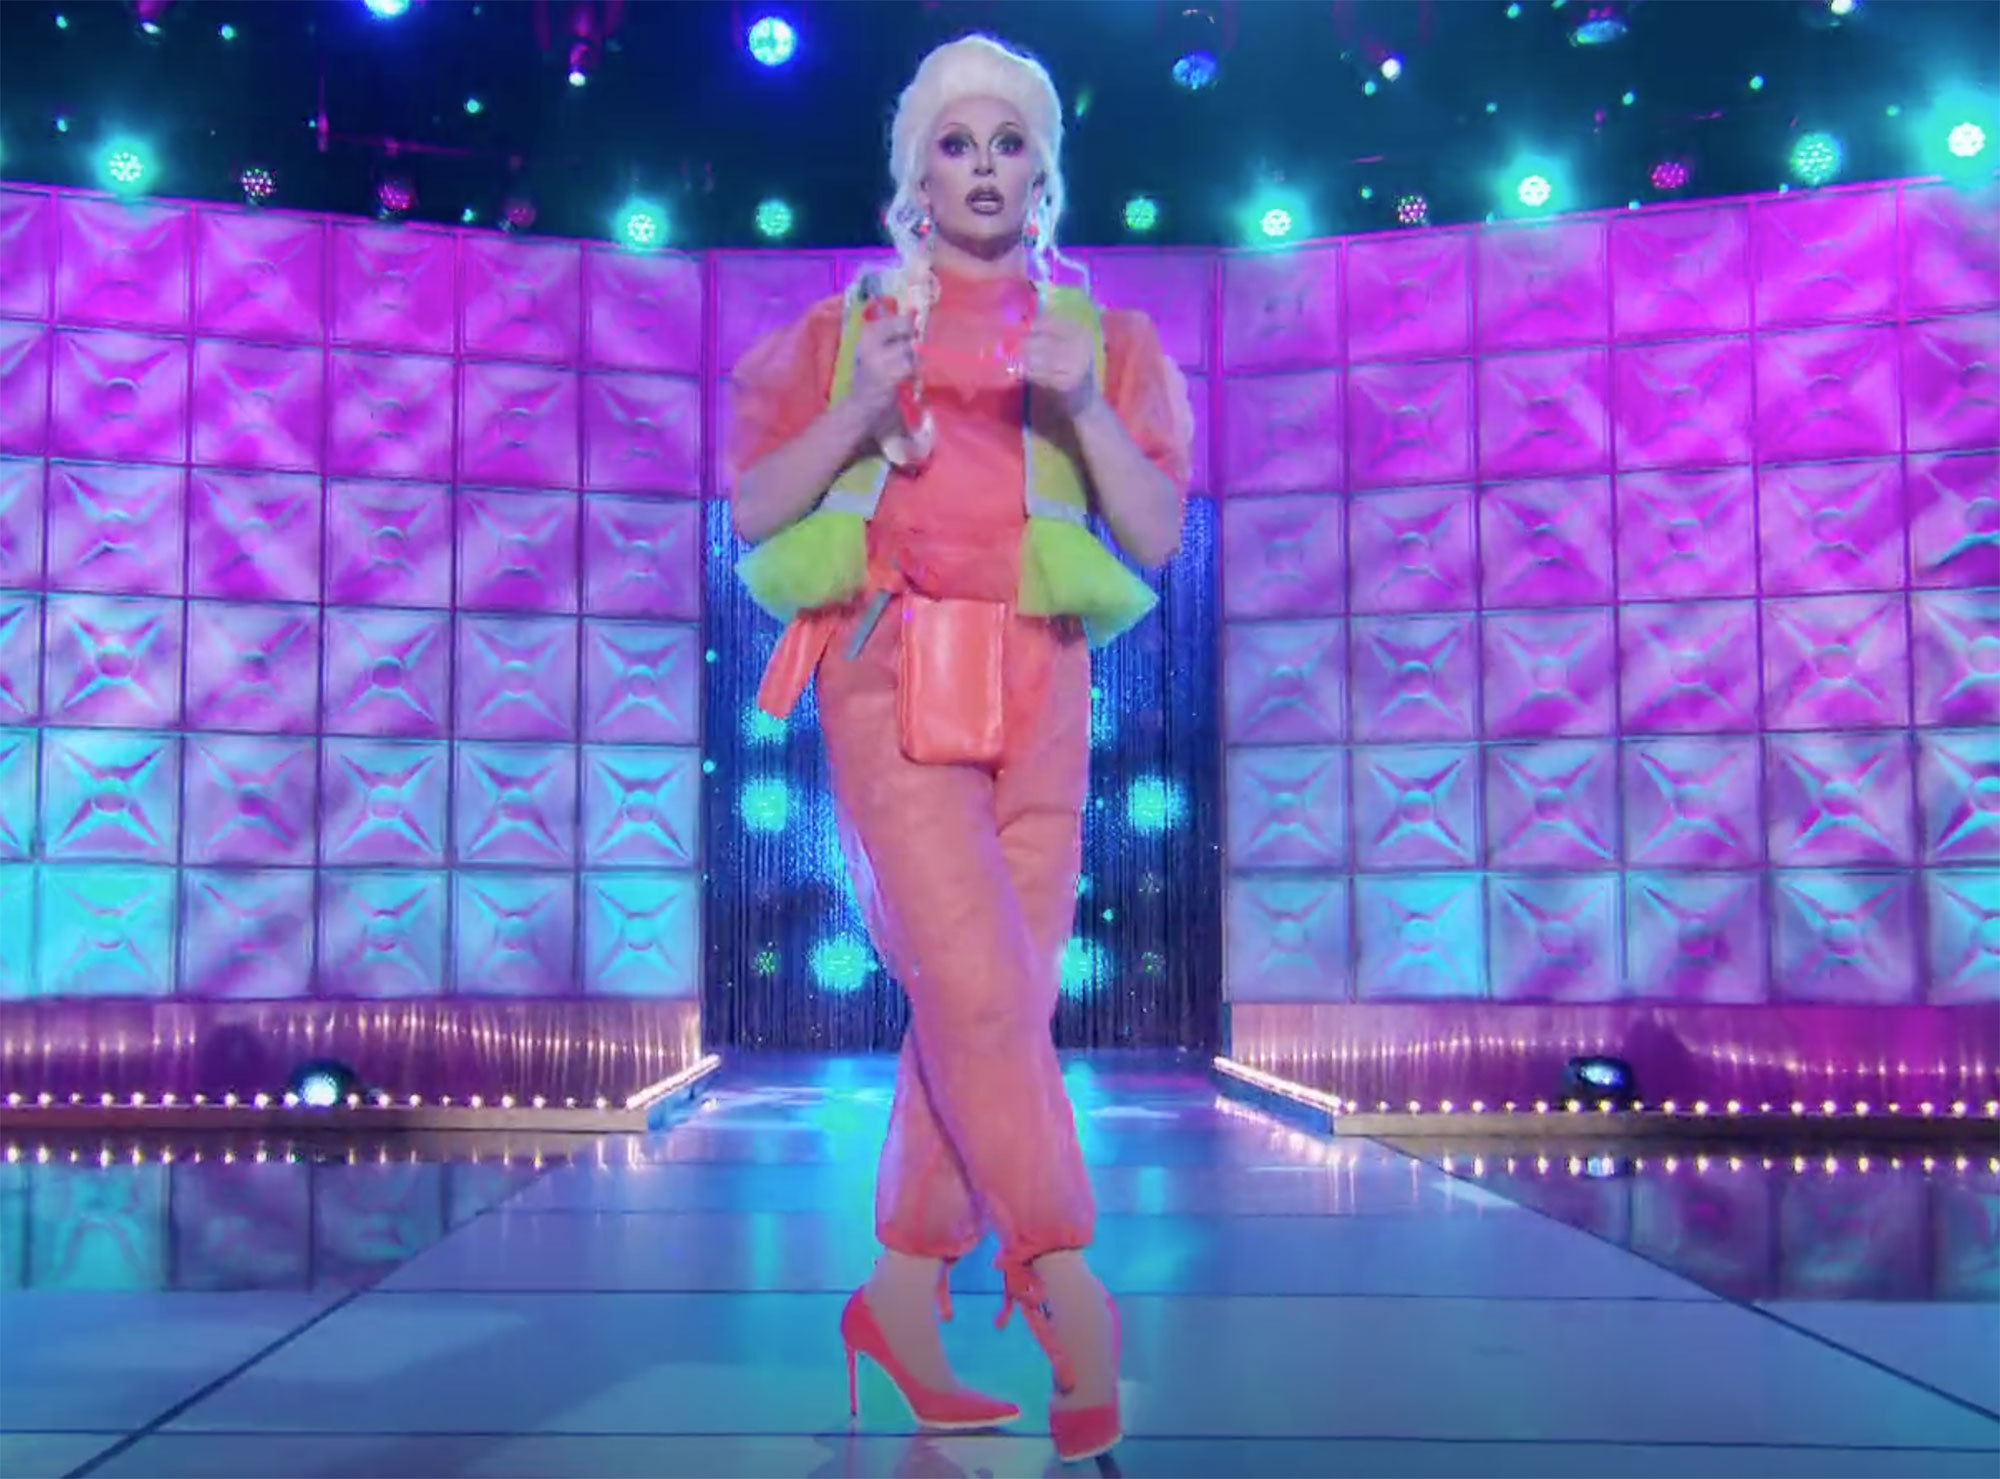 Drag queen Jan dressed in a neon orange and yellow tulle construction style outfit